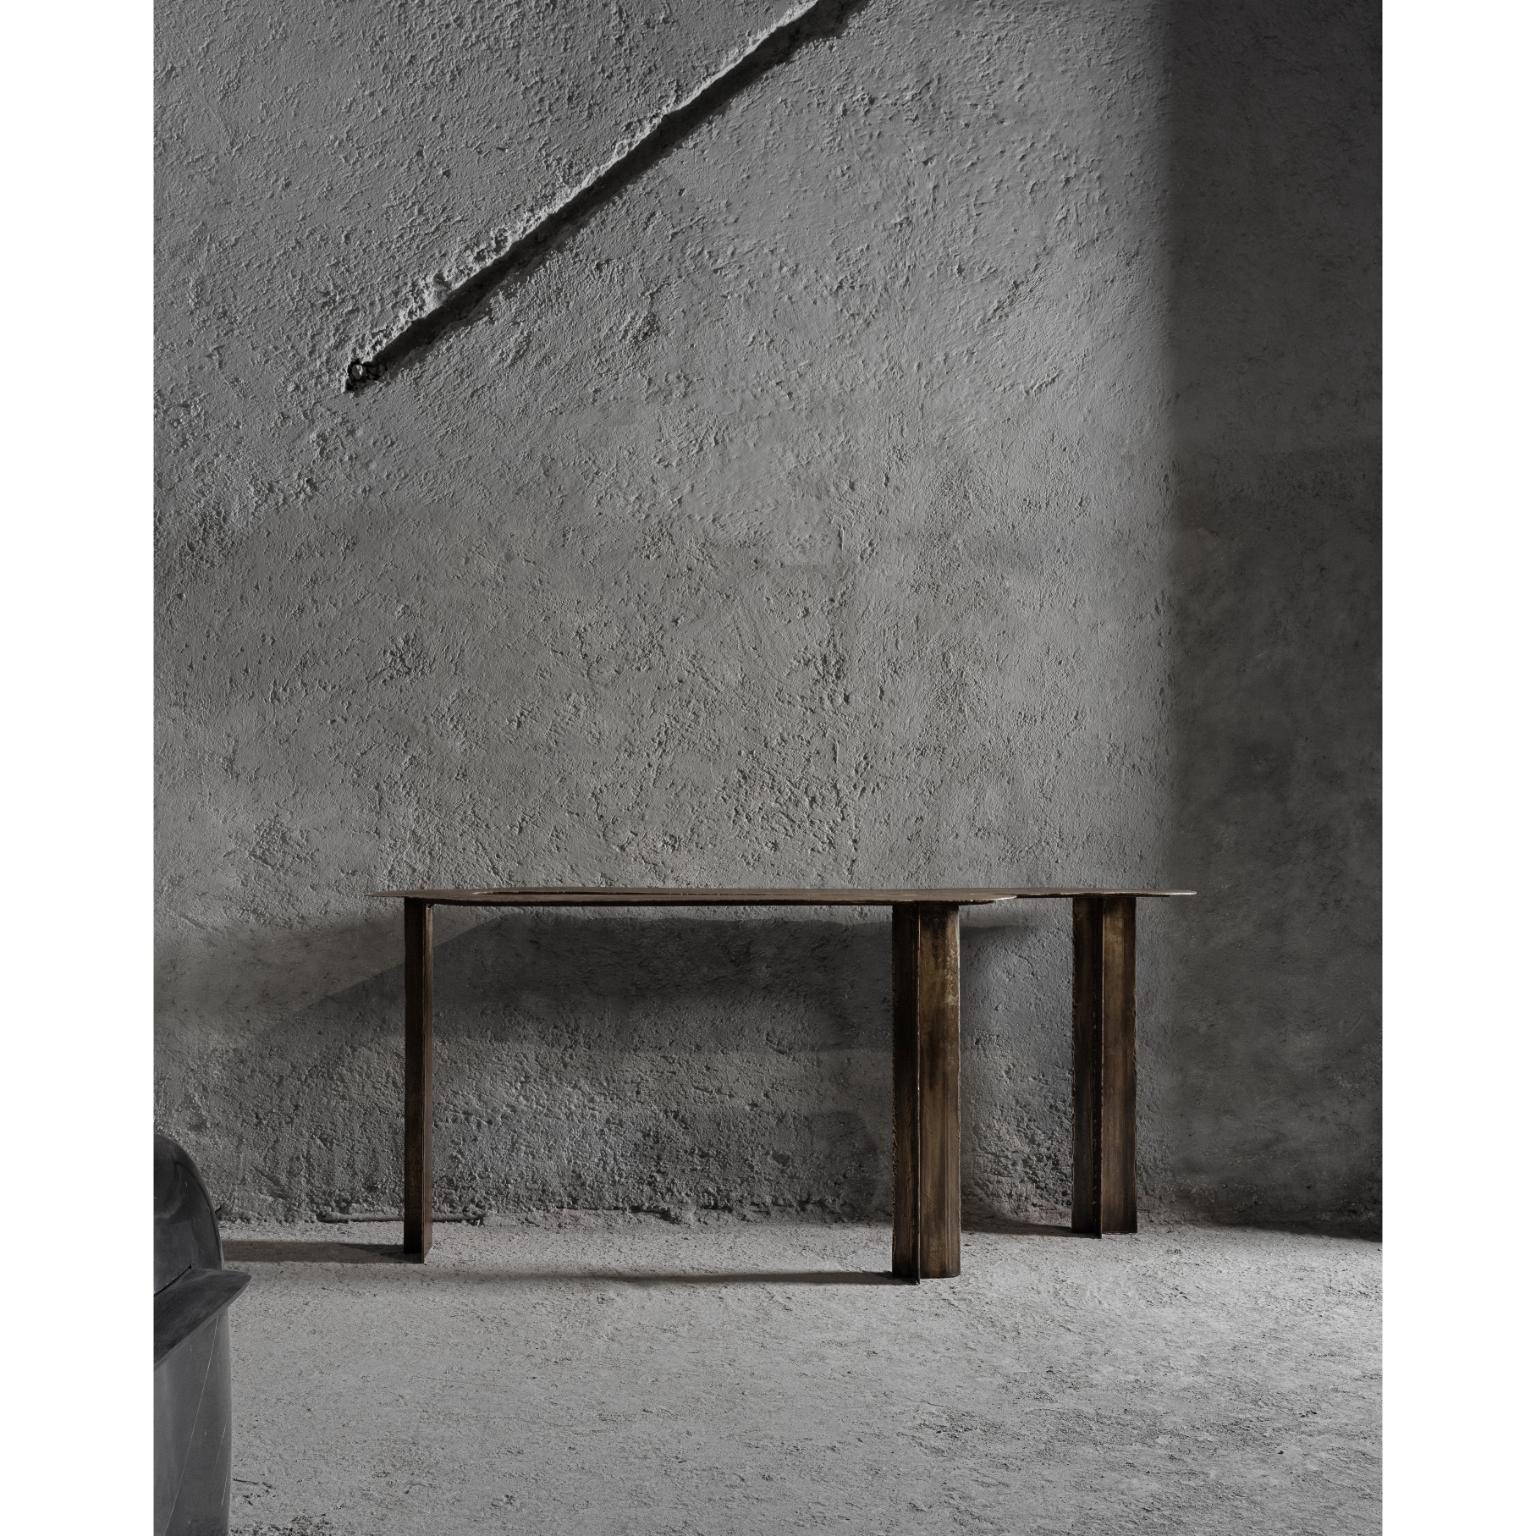 Muisca Console Table by Ombia
One Of A Kind.
Dimensions: D 50.8 x D 198.1 x H 81.3 cm.
Materials: Textured brass.

Ōmbia is a ceramic sculpture and design studio based in Los Angeles. The name and its roots originates from Colombia, where designer